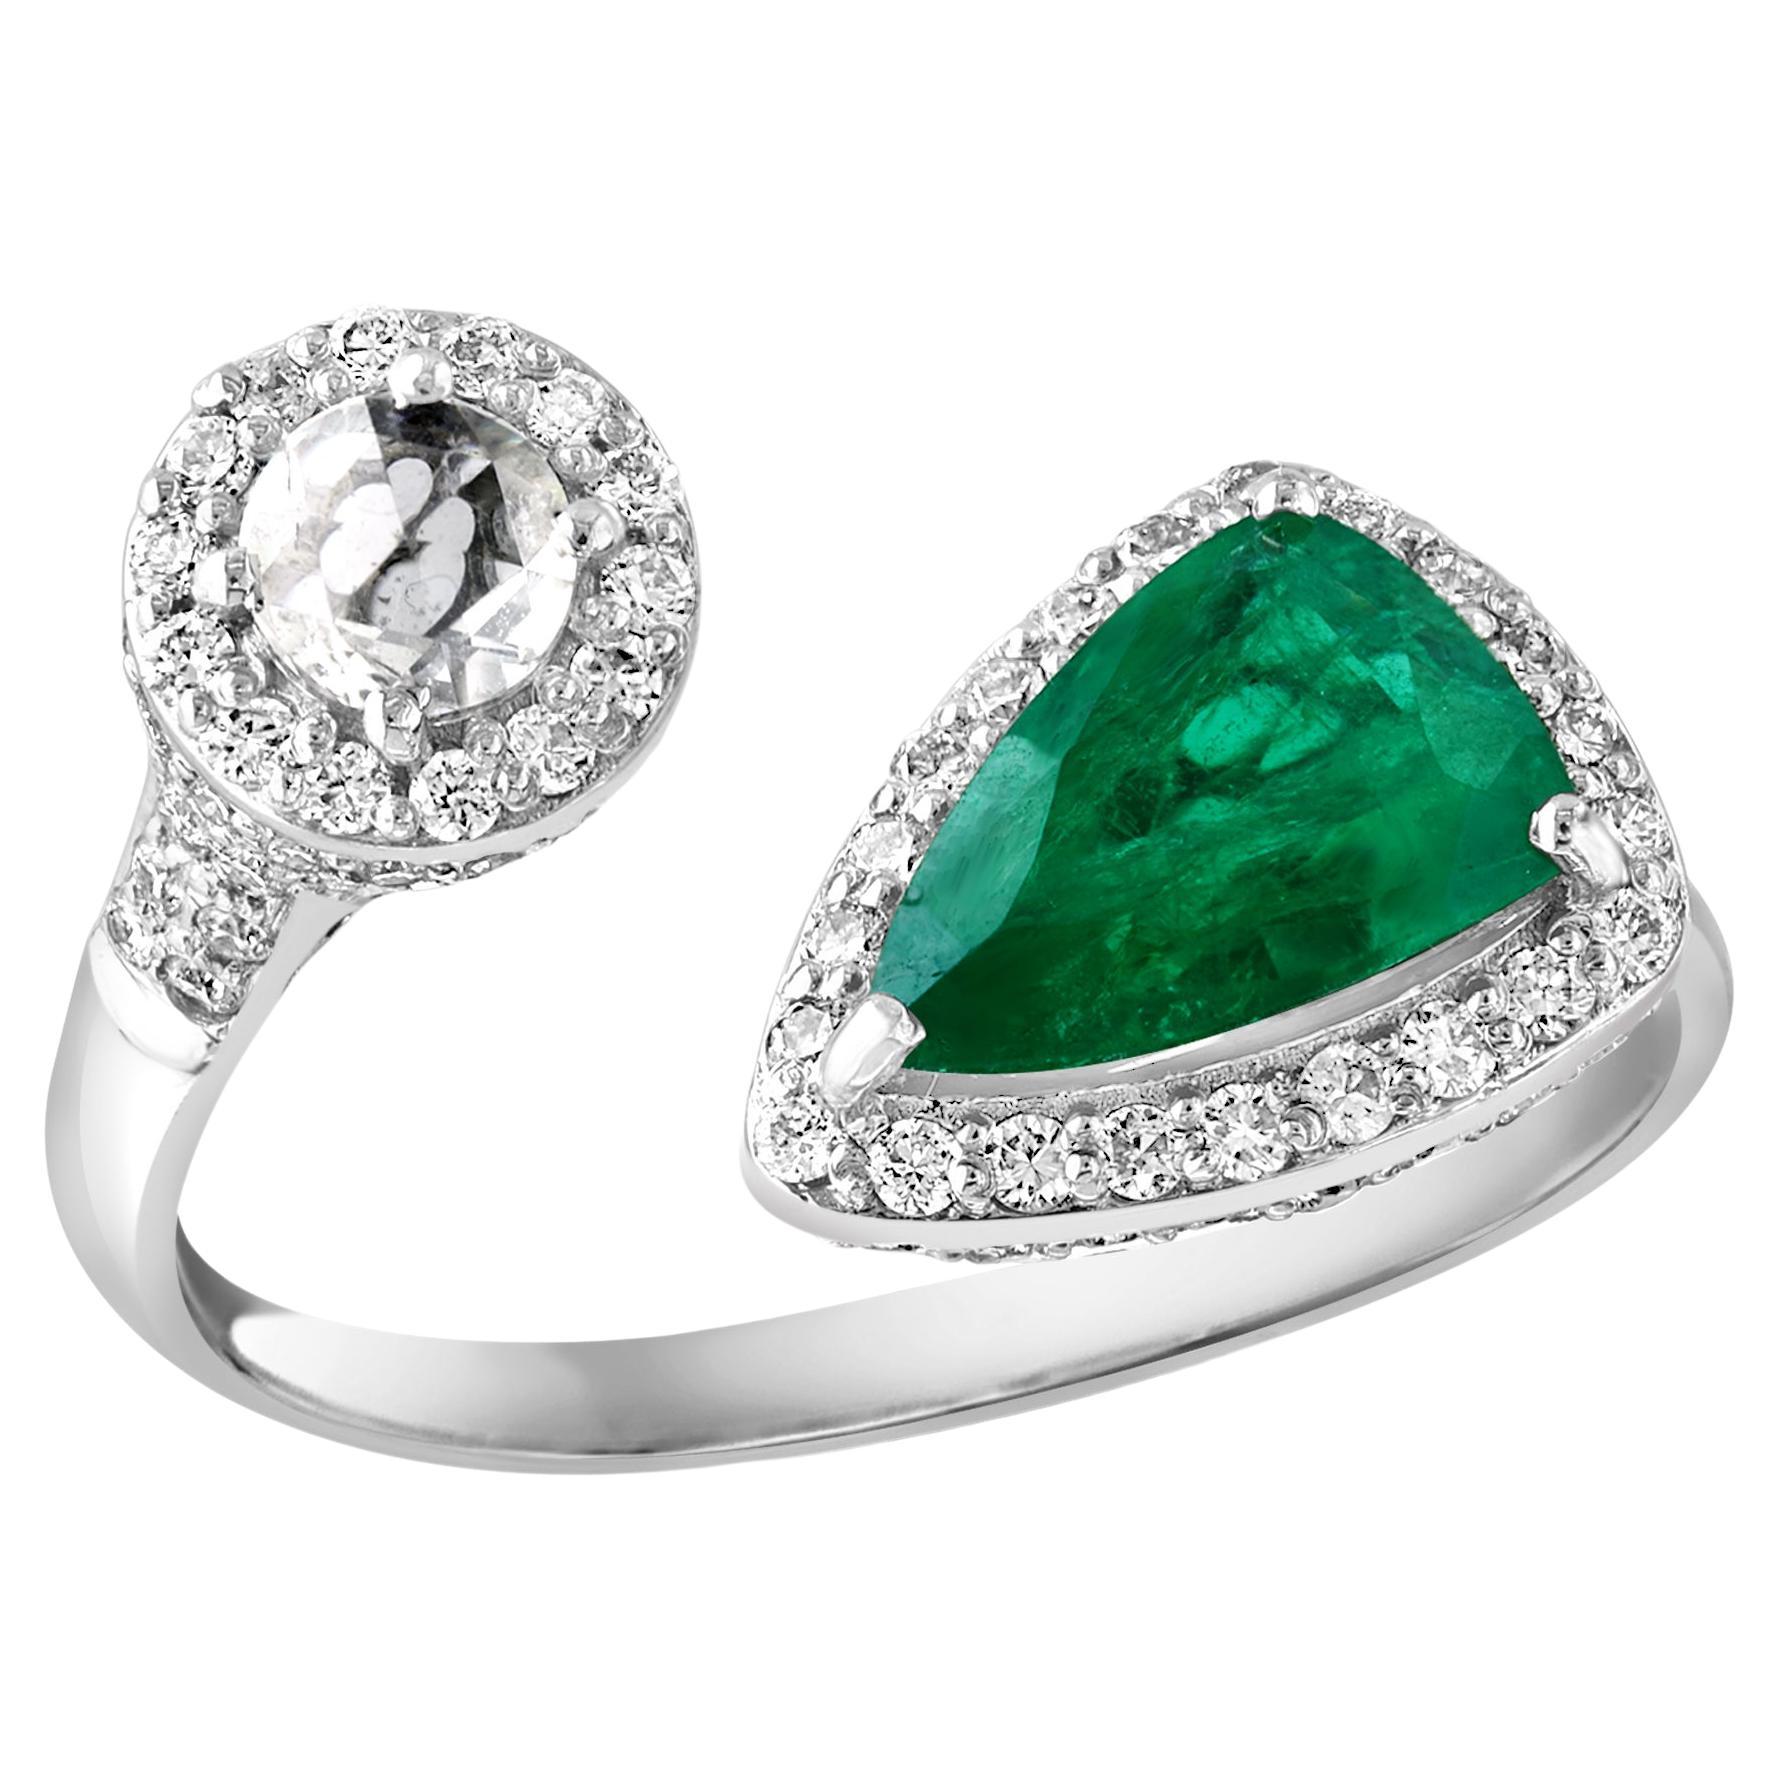 1.5 Ct Finest Colombian Pear Emerald & 1 Ct Diamond Ring in 18 Kt Gold Size 8 For Sale